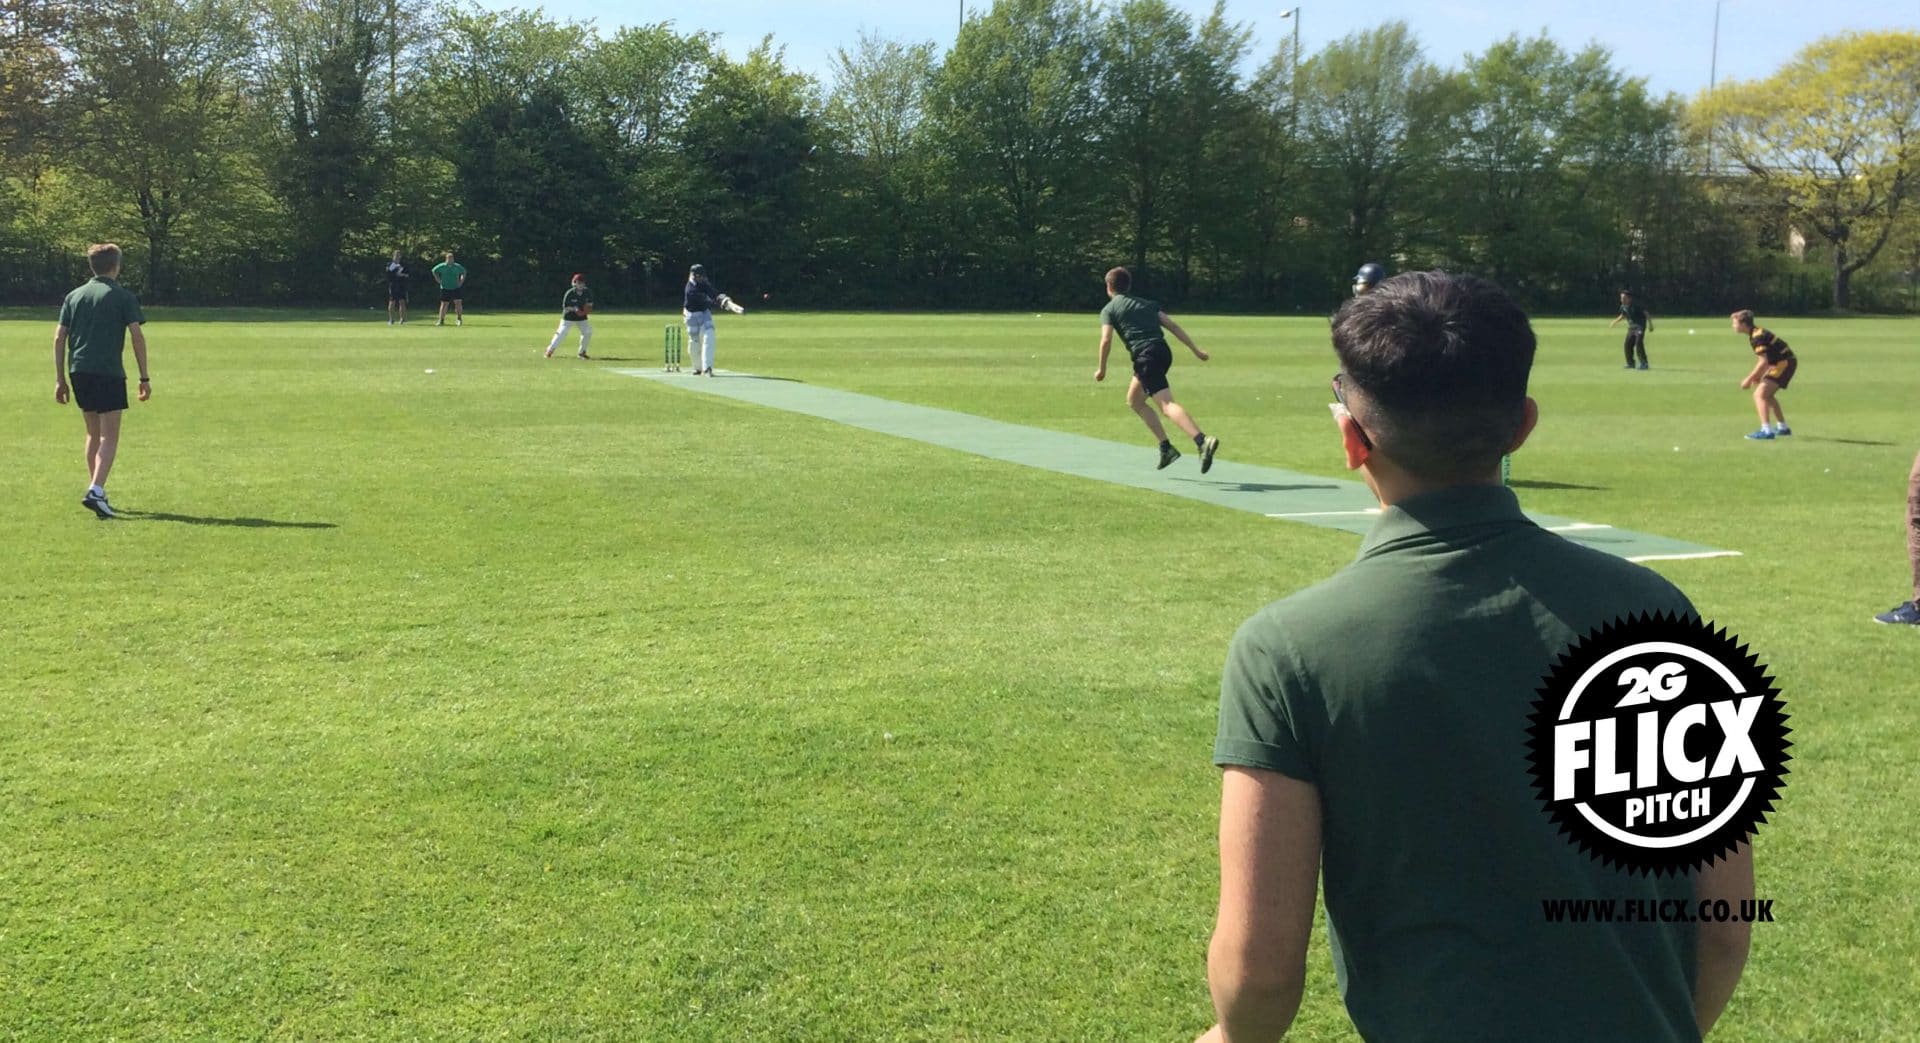 9 applications of the world's most versatile cricket pitch